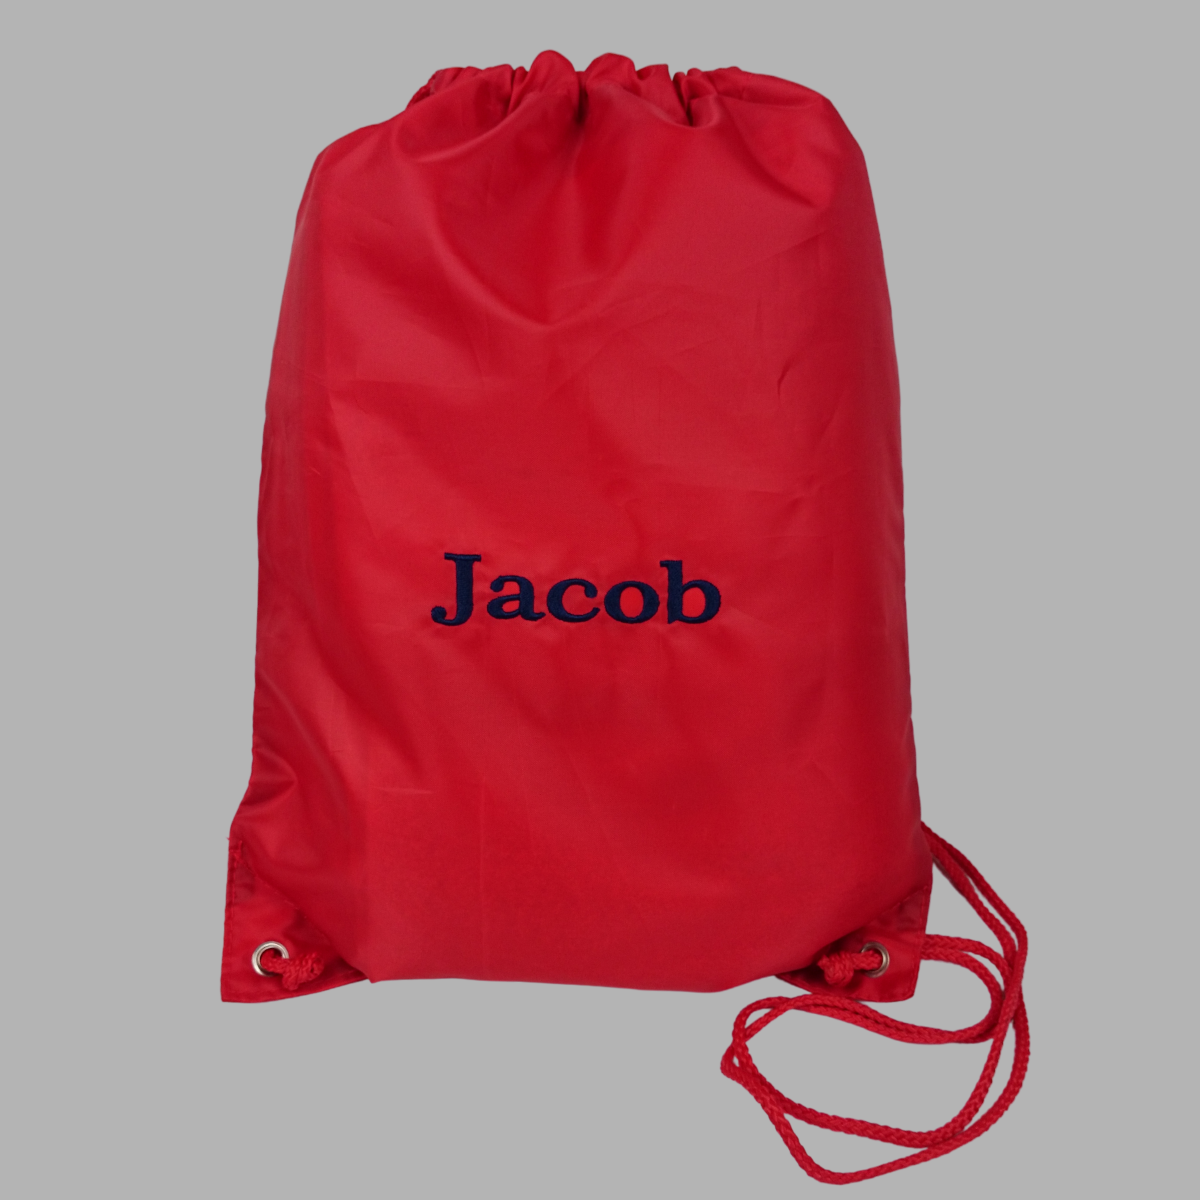 Personalised PE or swimming bag shown in red with a name embroidered in navy blue thread.